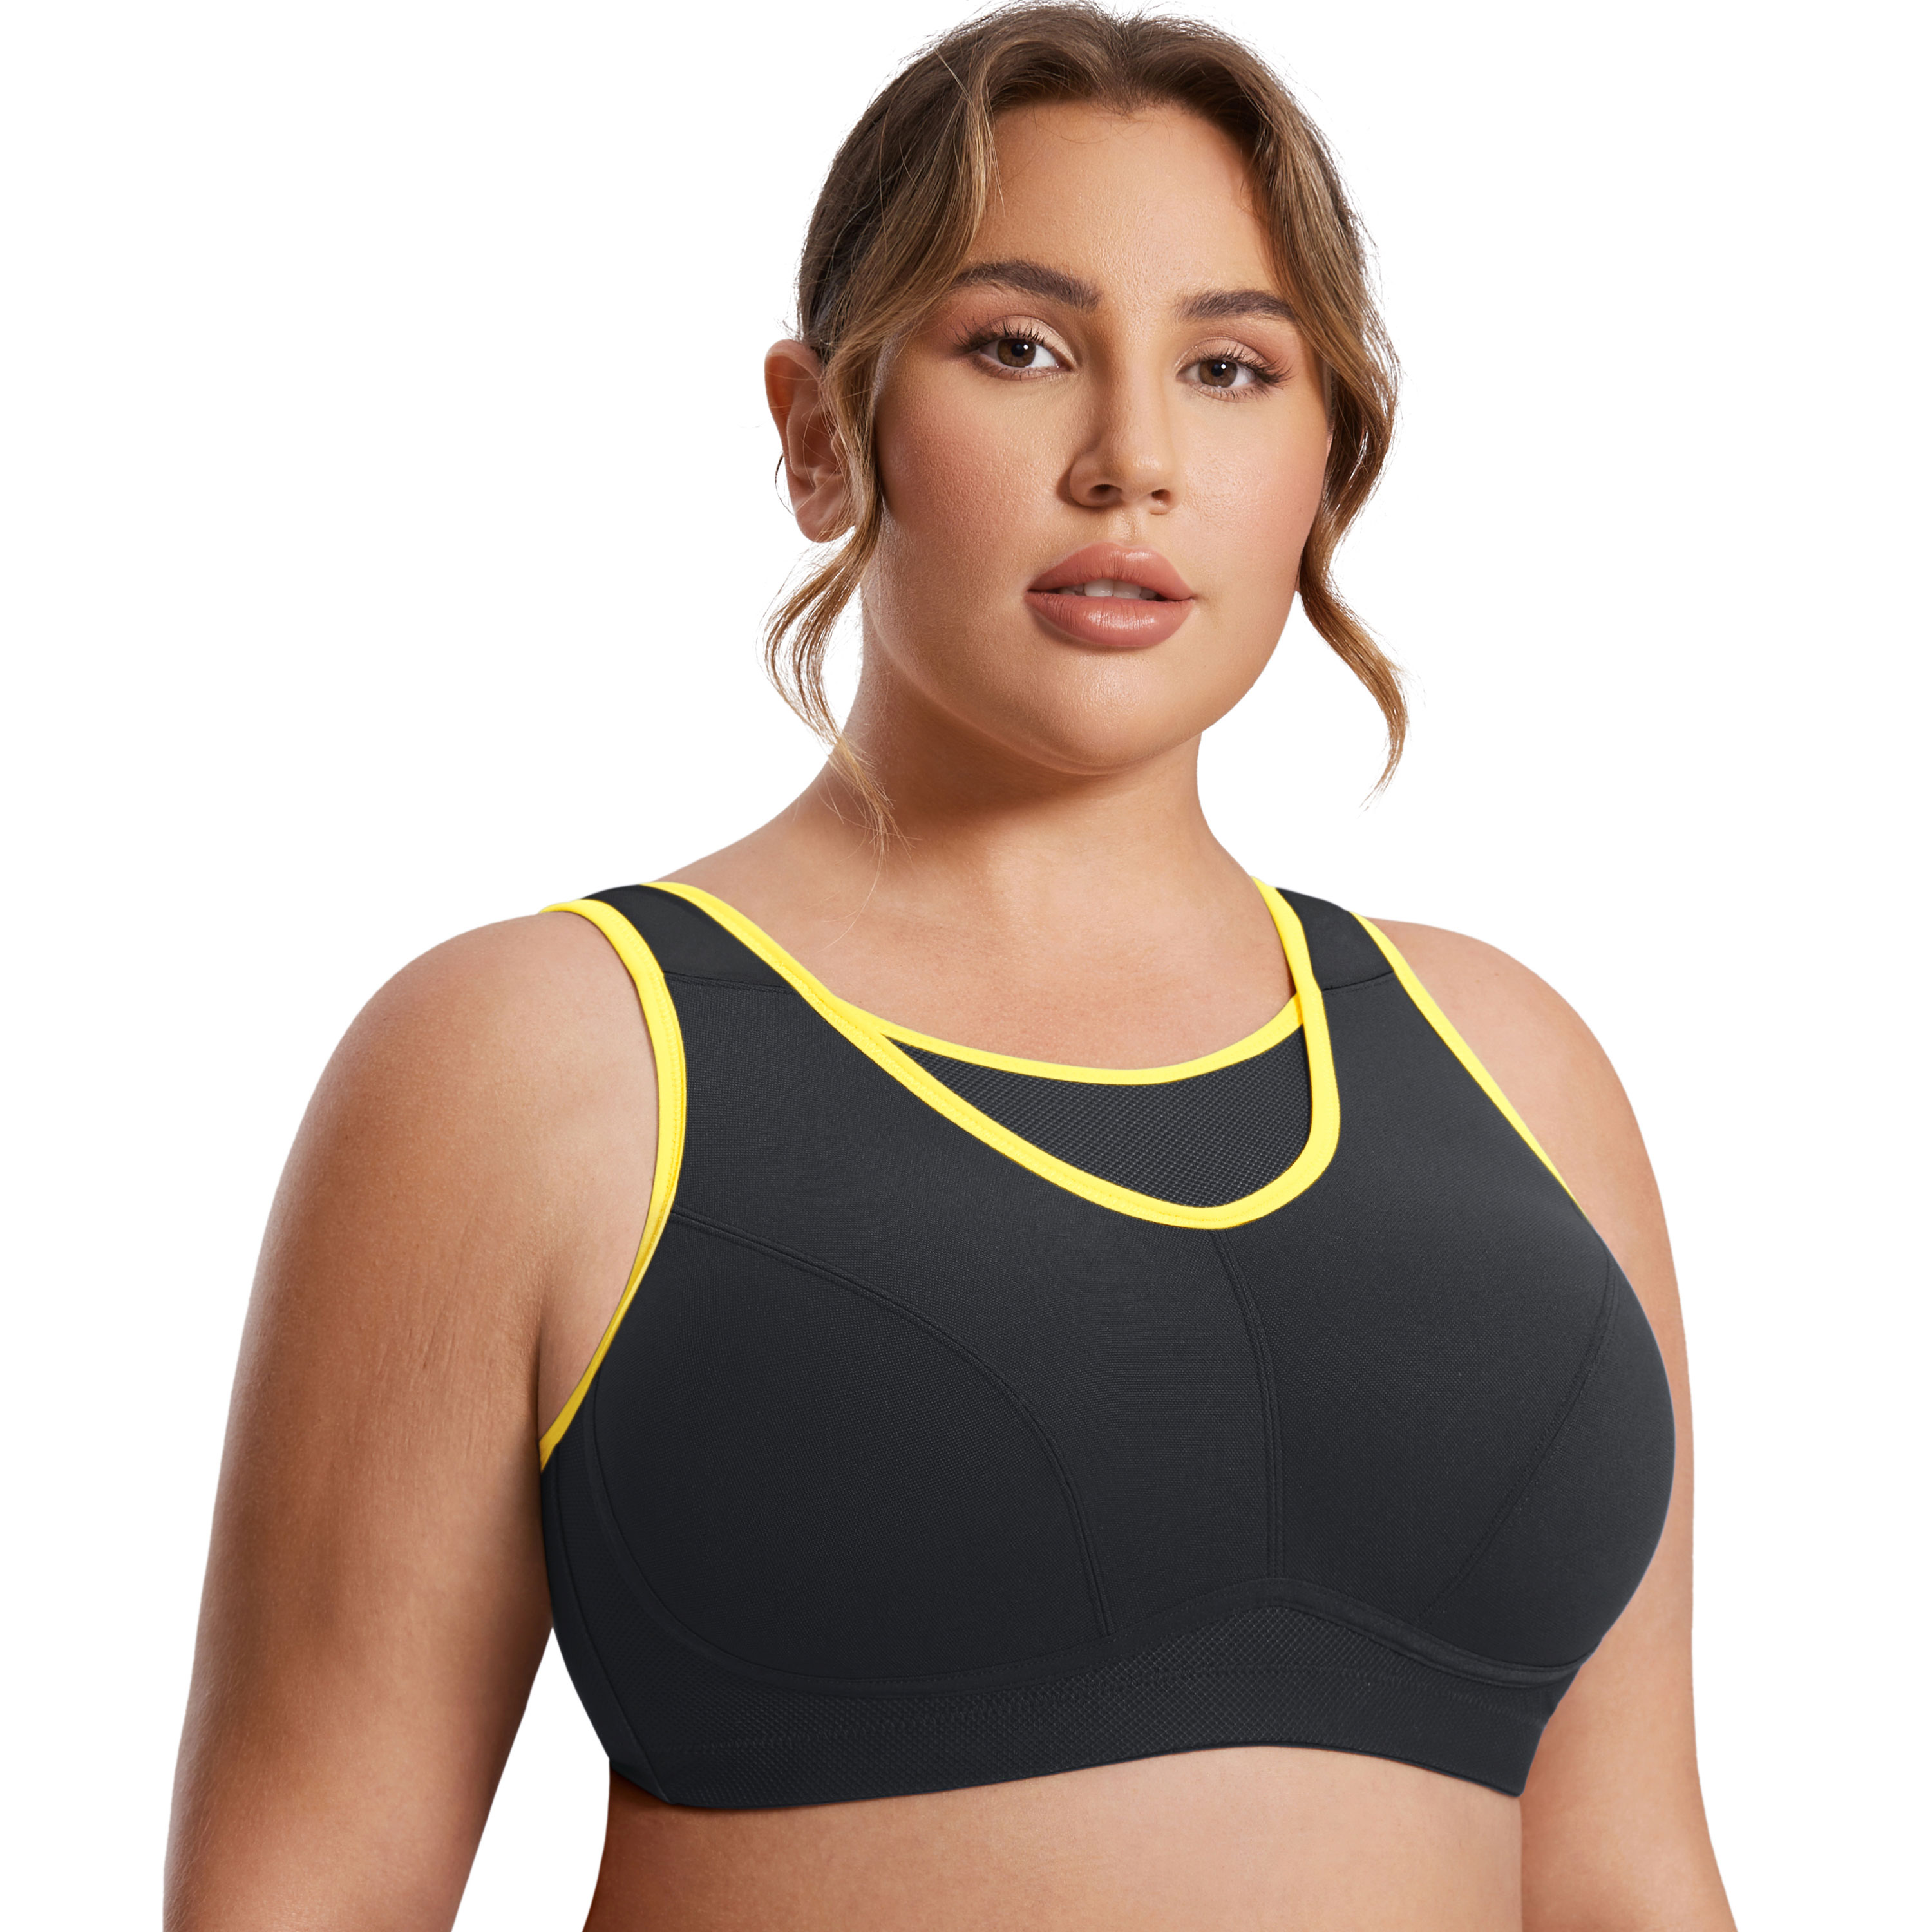 SYROKAN Women's Plus Size High Impact Sports Bra Full Cup Wirefree